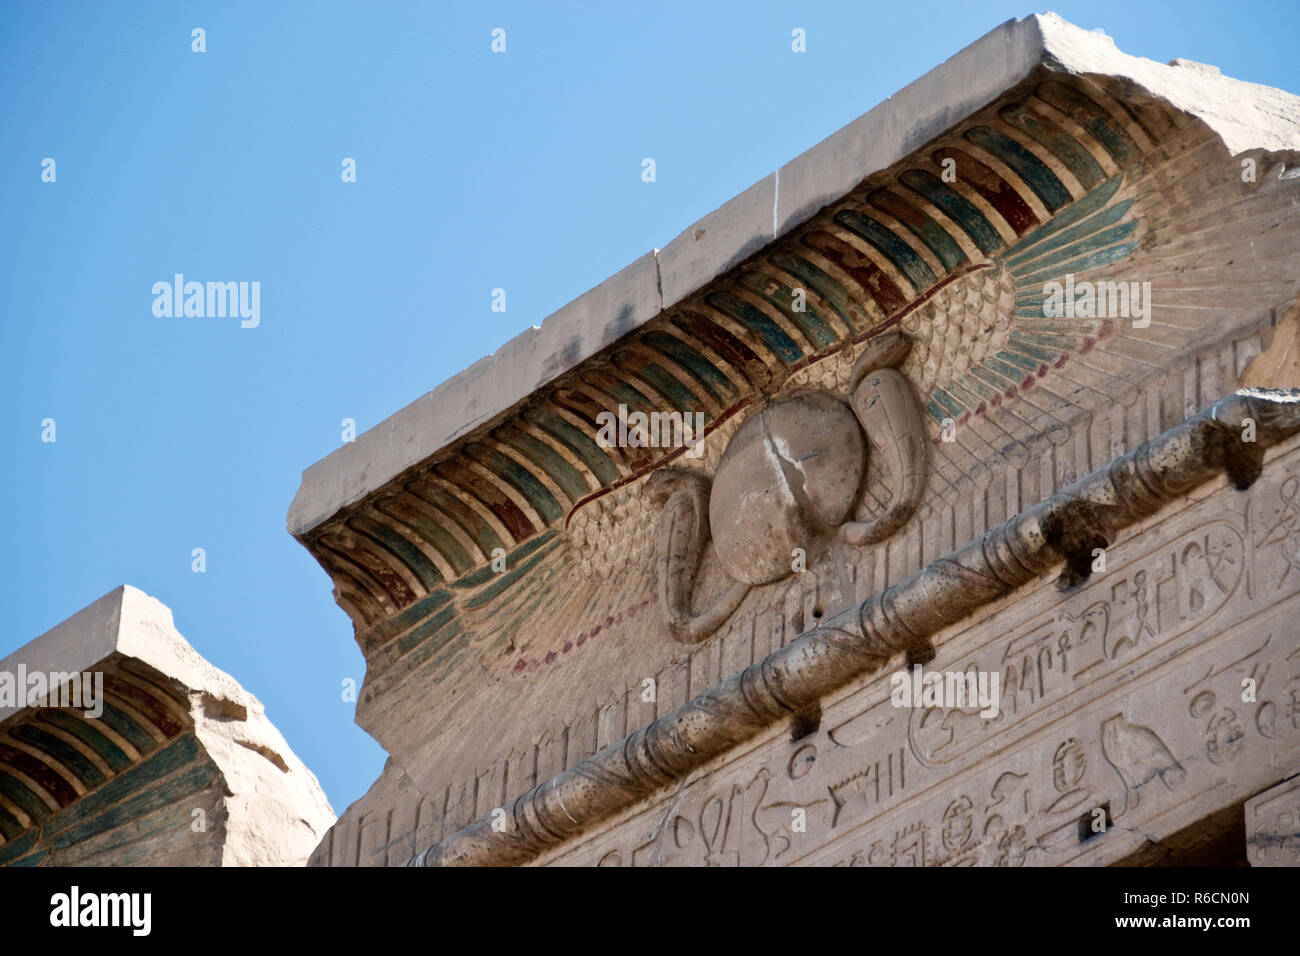 A Cavetto cornice with a winged sun, a symbol associated with divinity, royalty and power in the ancient Egypt, at the Temple of Kom Ombo, Egypt. Stock Photo